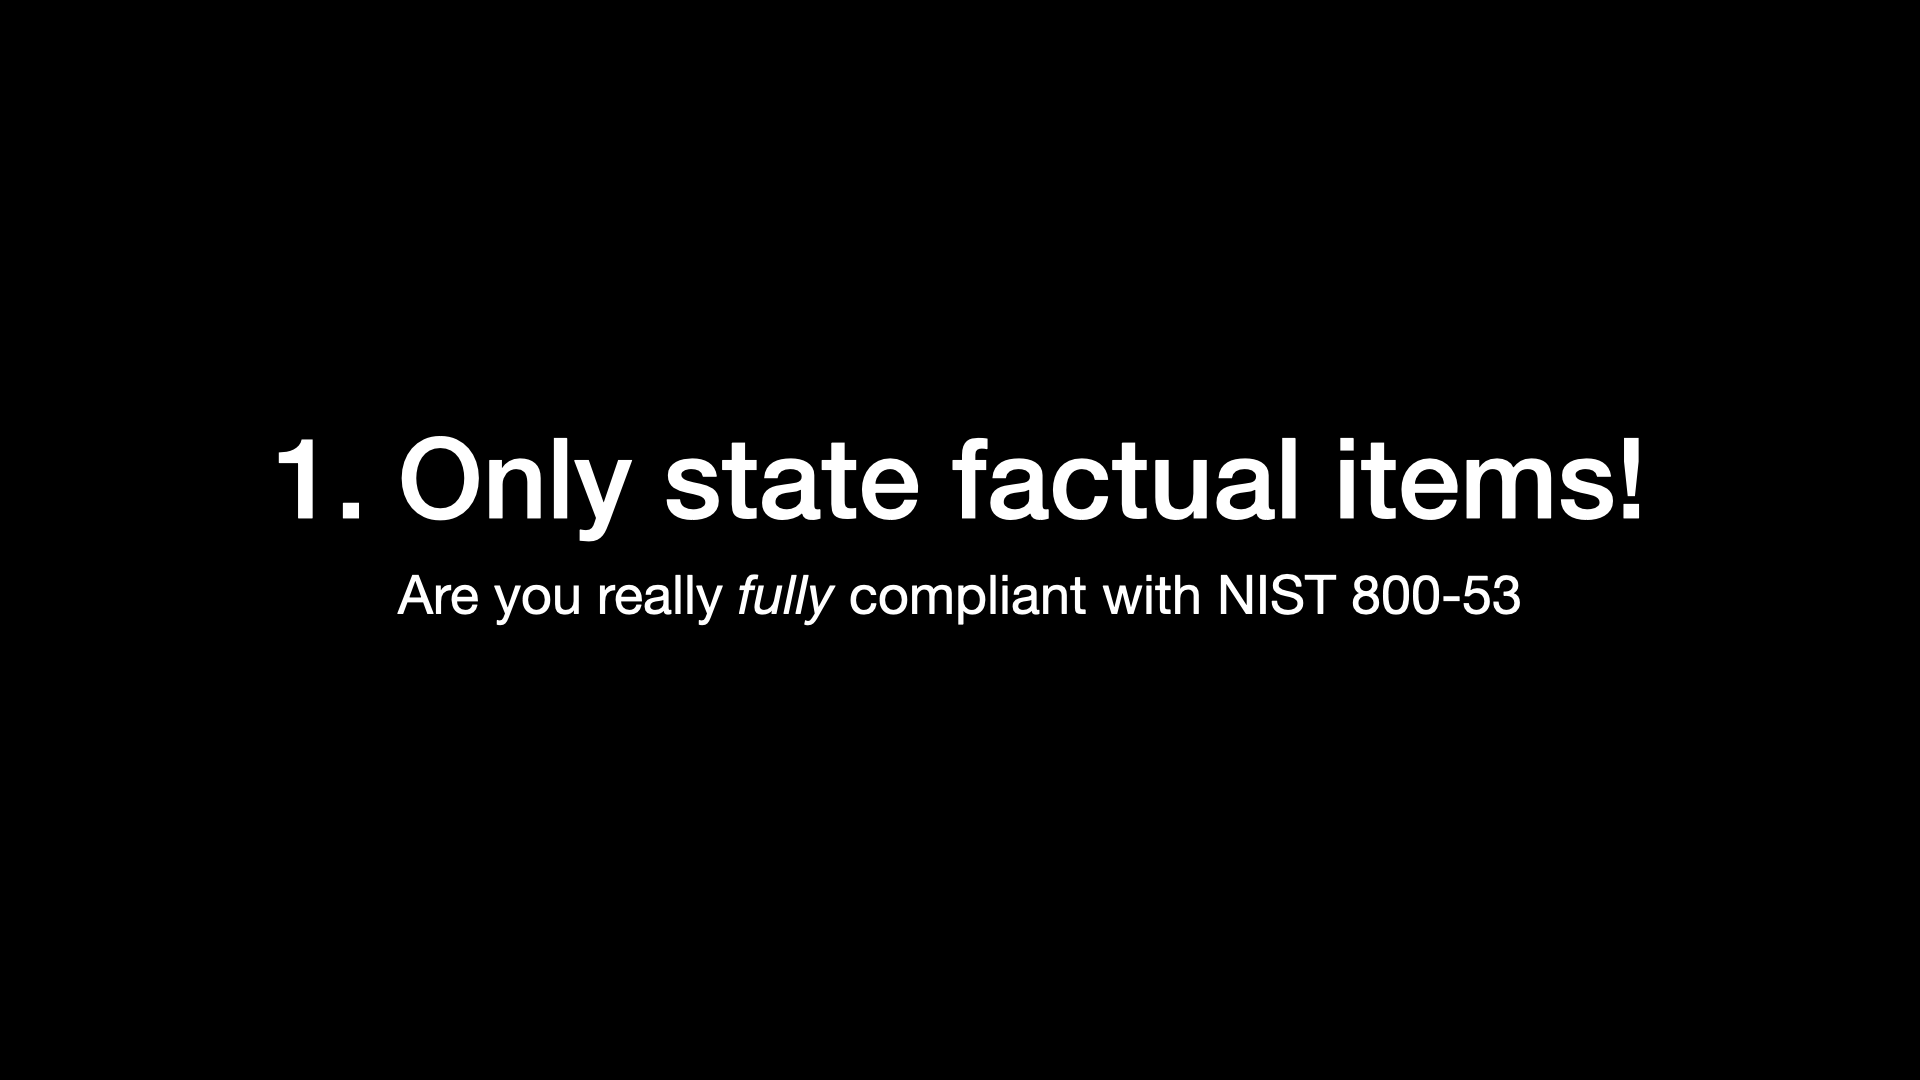 1. Only state factual items! Are you really fully compliant with NIST 800-53 